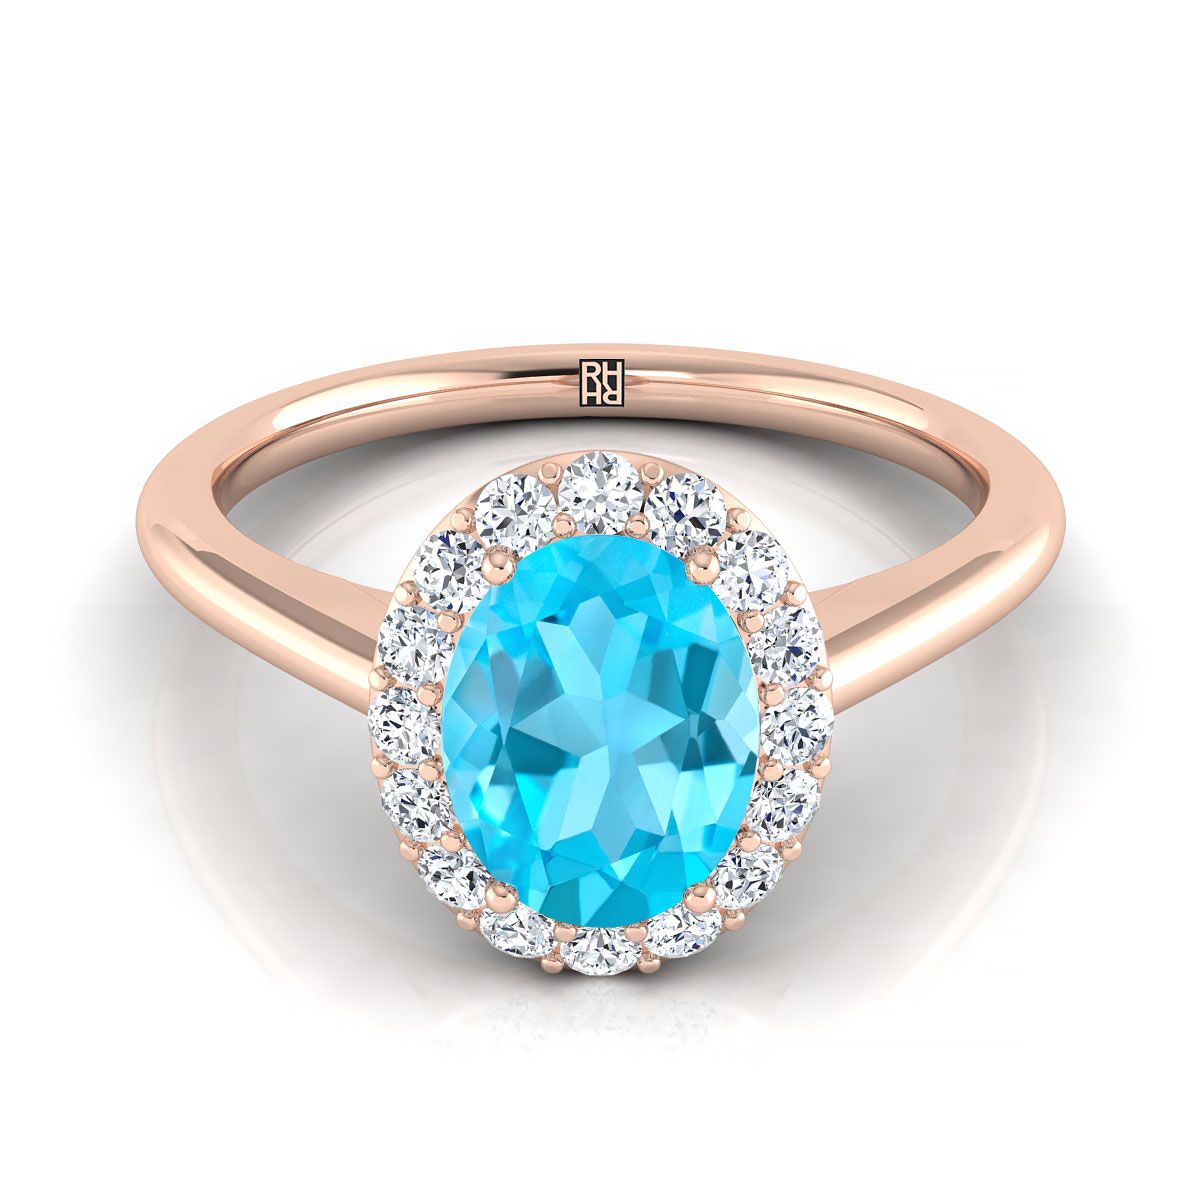 14K Rose Gold Oval Swiss Blue Topaz Shared Prong Diamond Halo Engagement Ring -1/5ctw